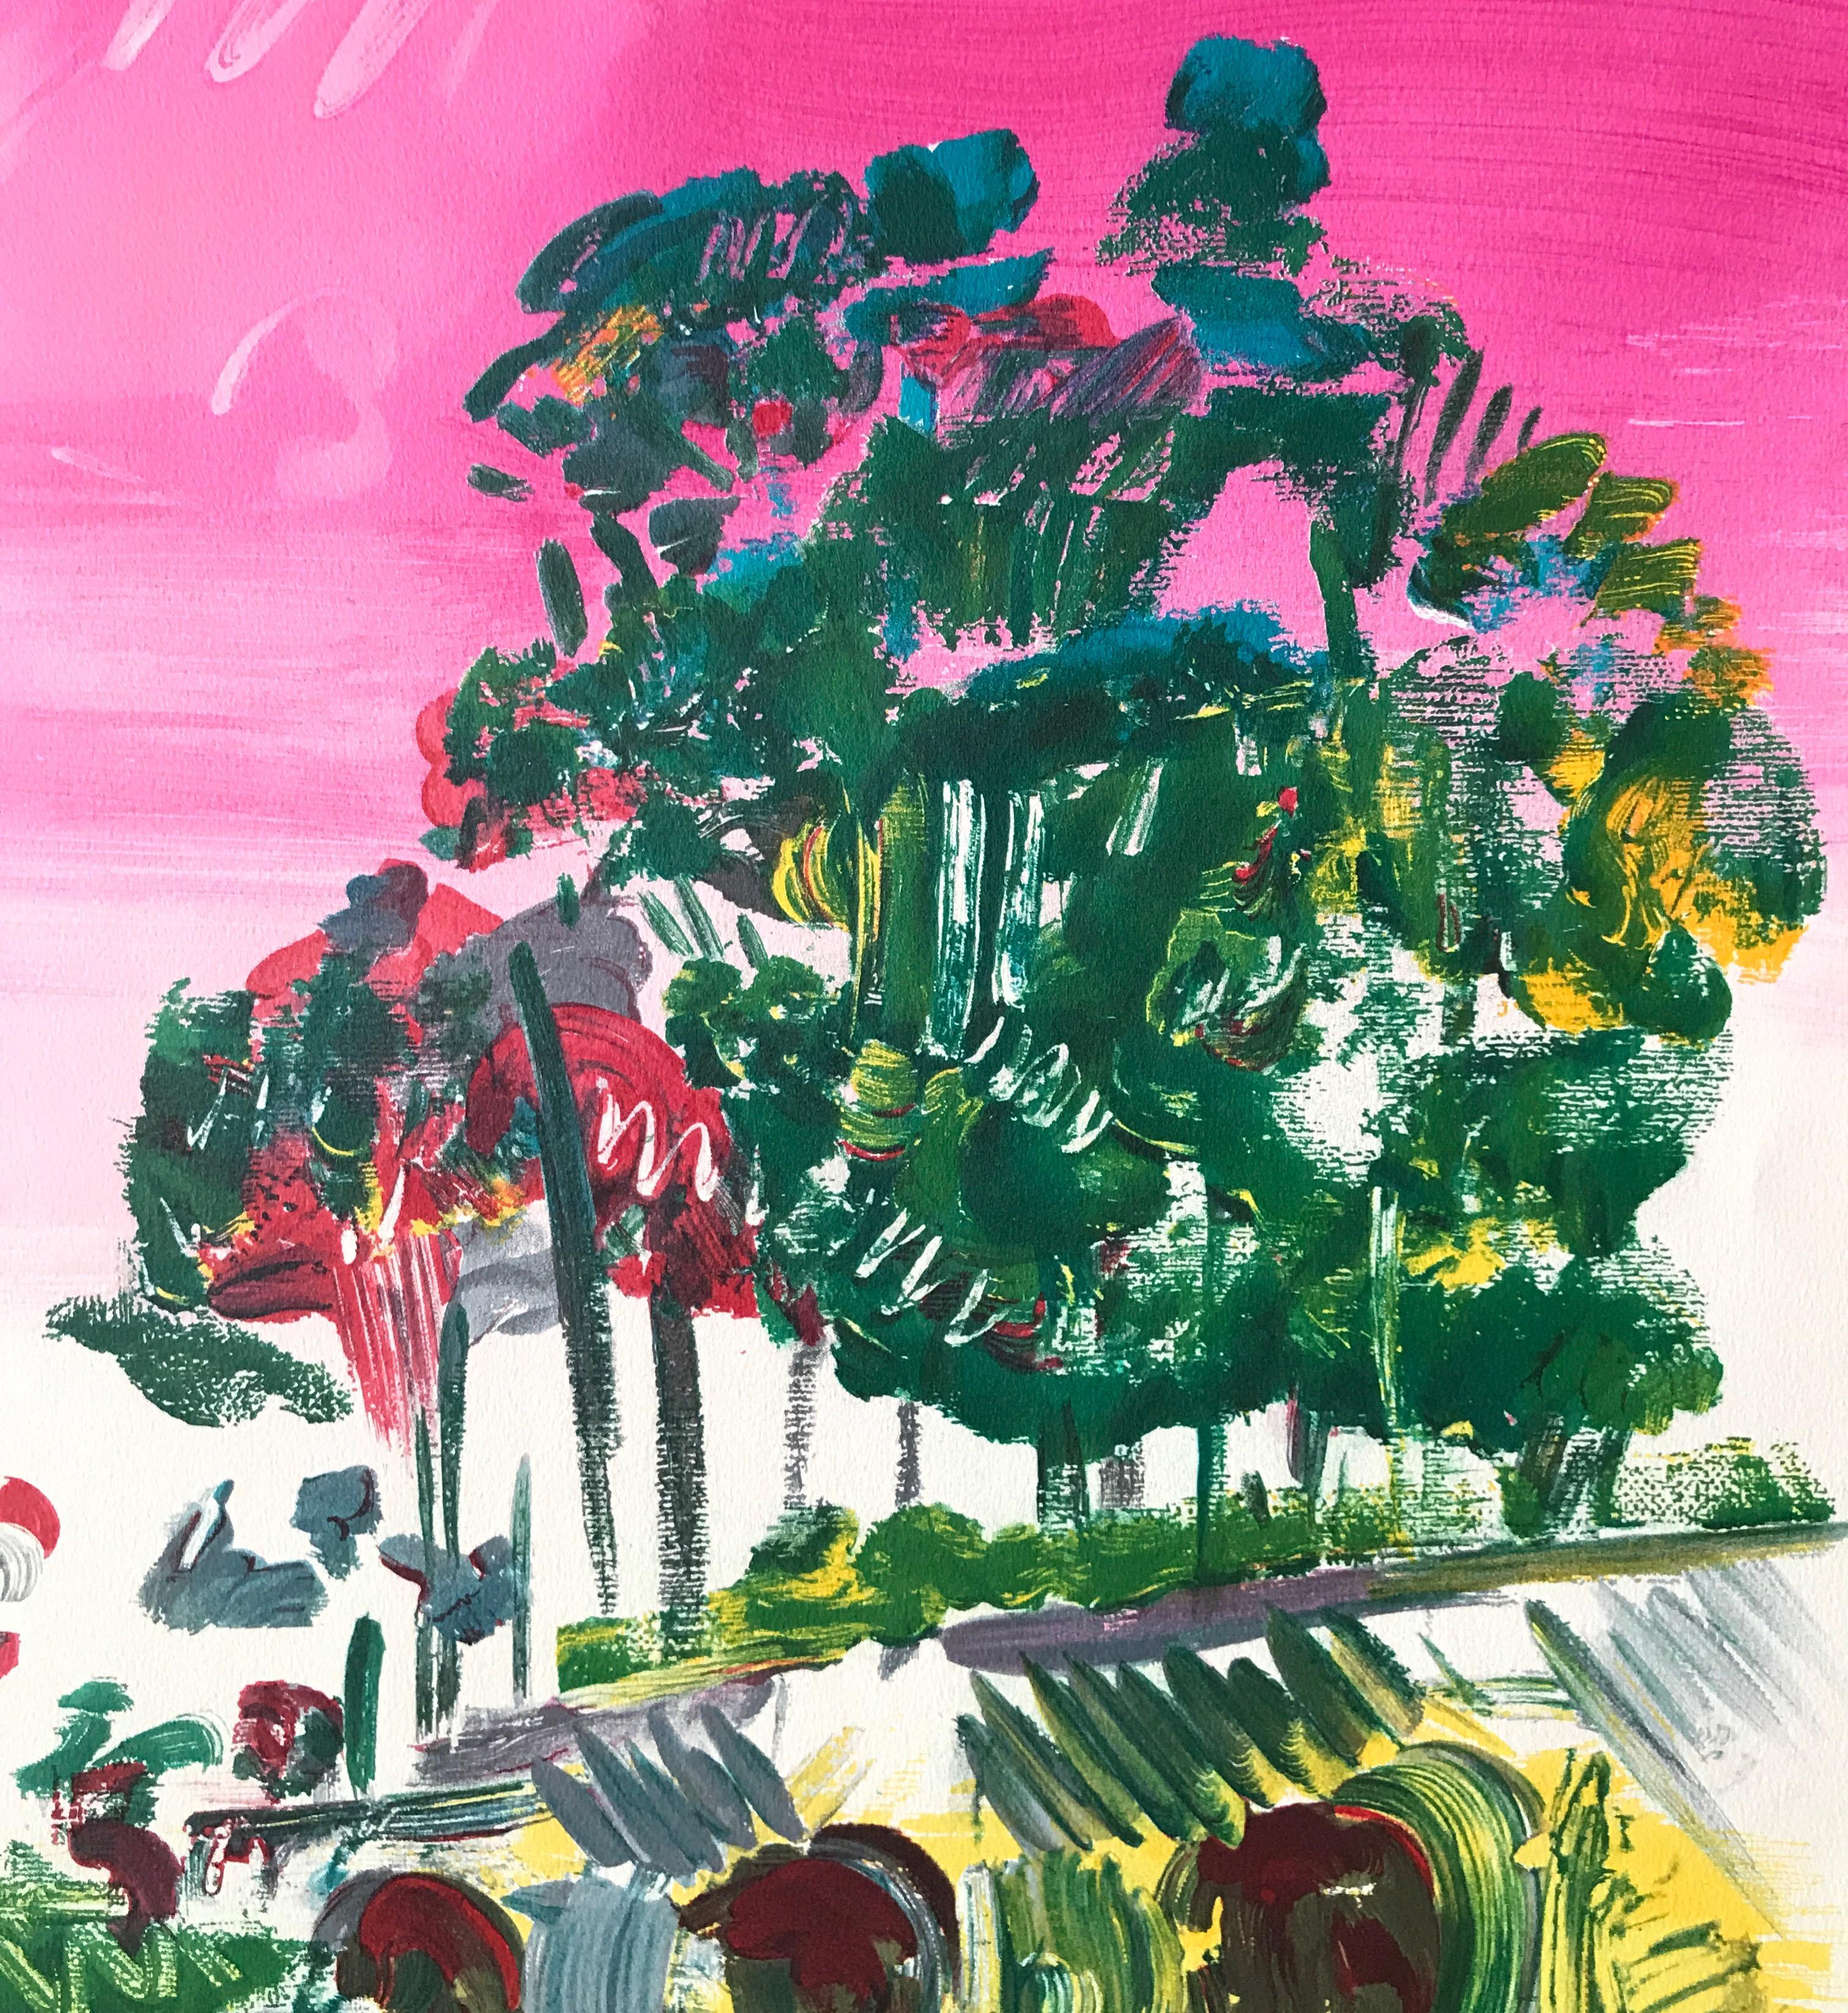 BALBOA PARK Signed Lithograph, Tower San Diego California, Pop Art Landscape - Print by Peter Max